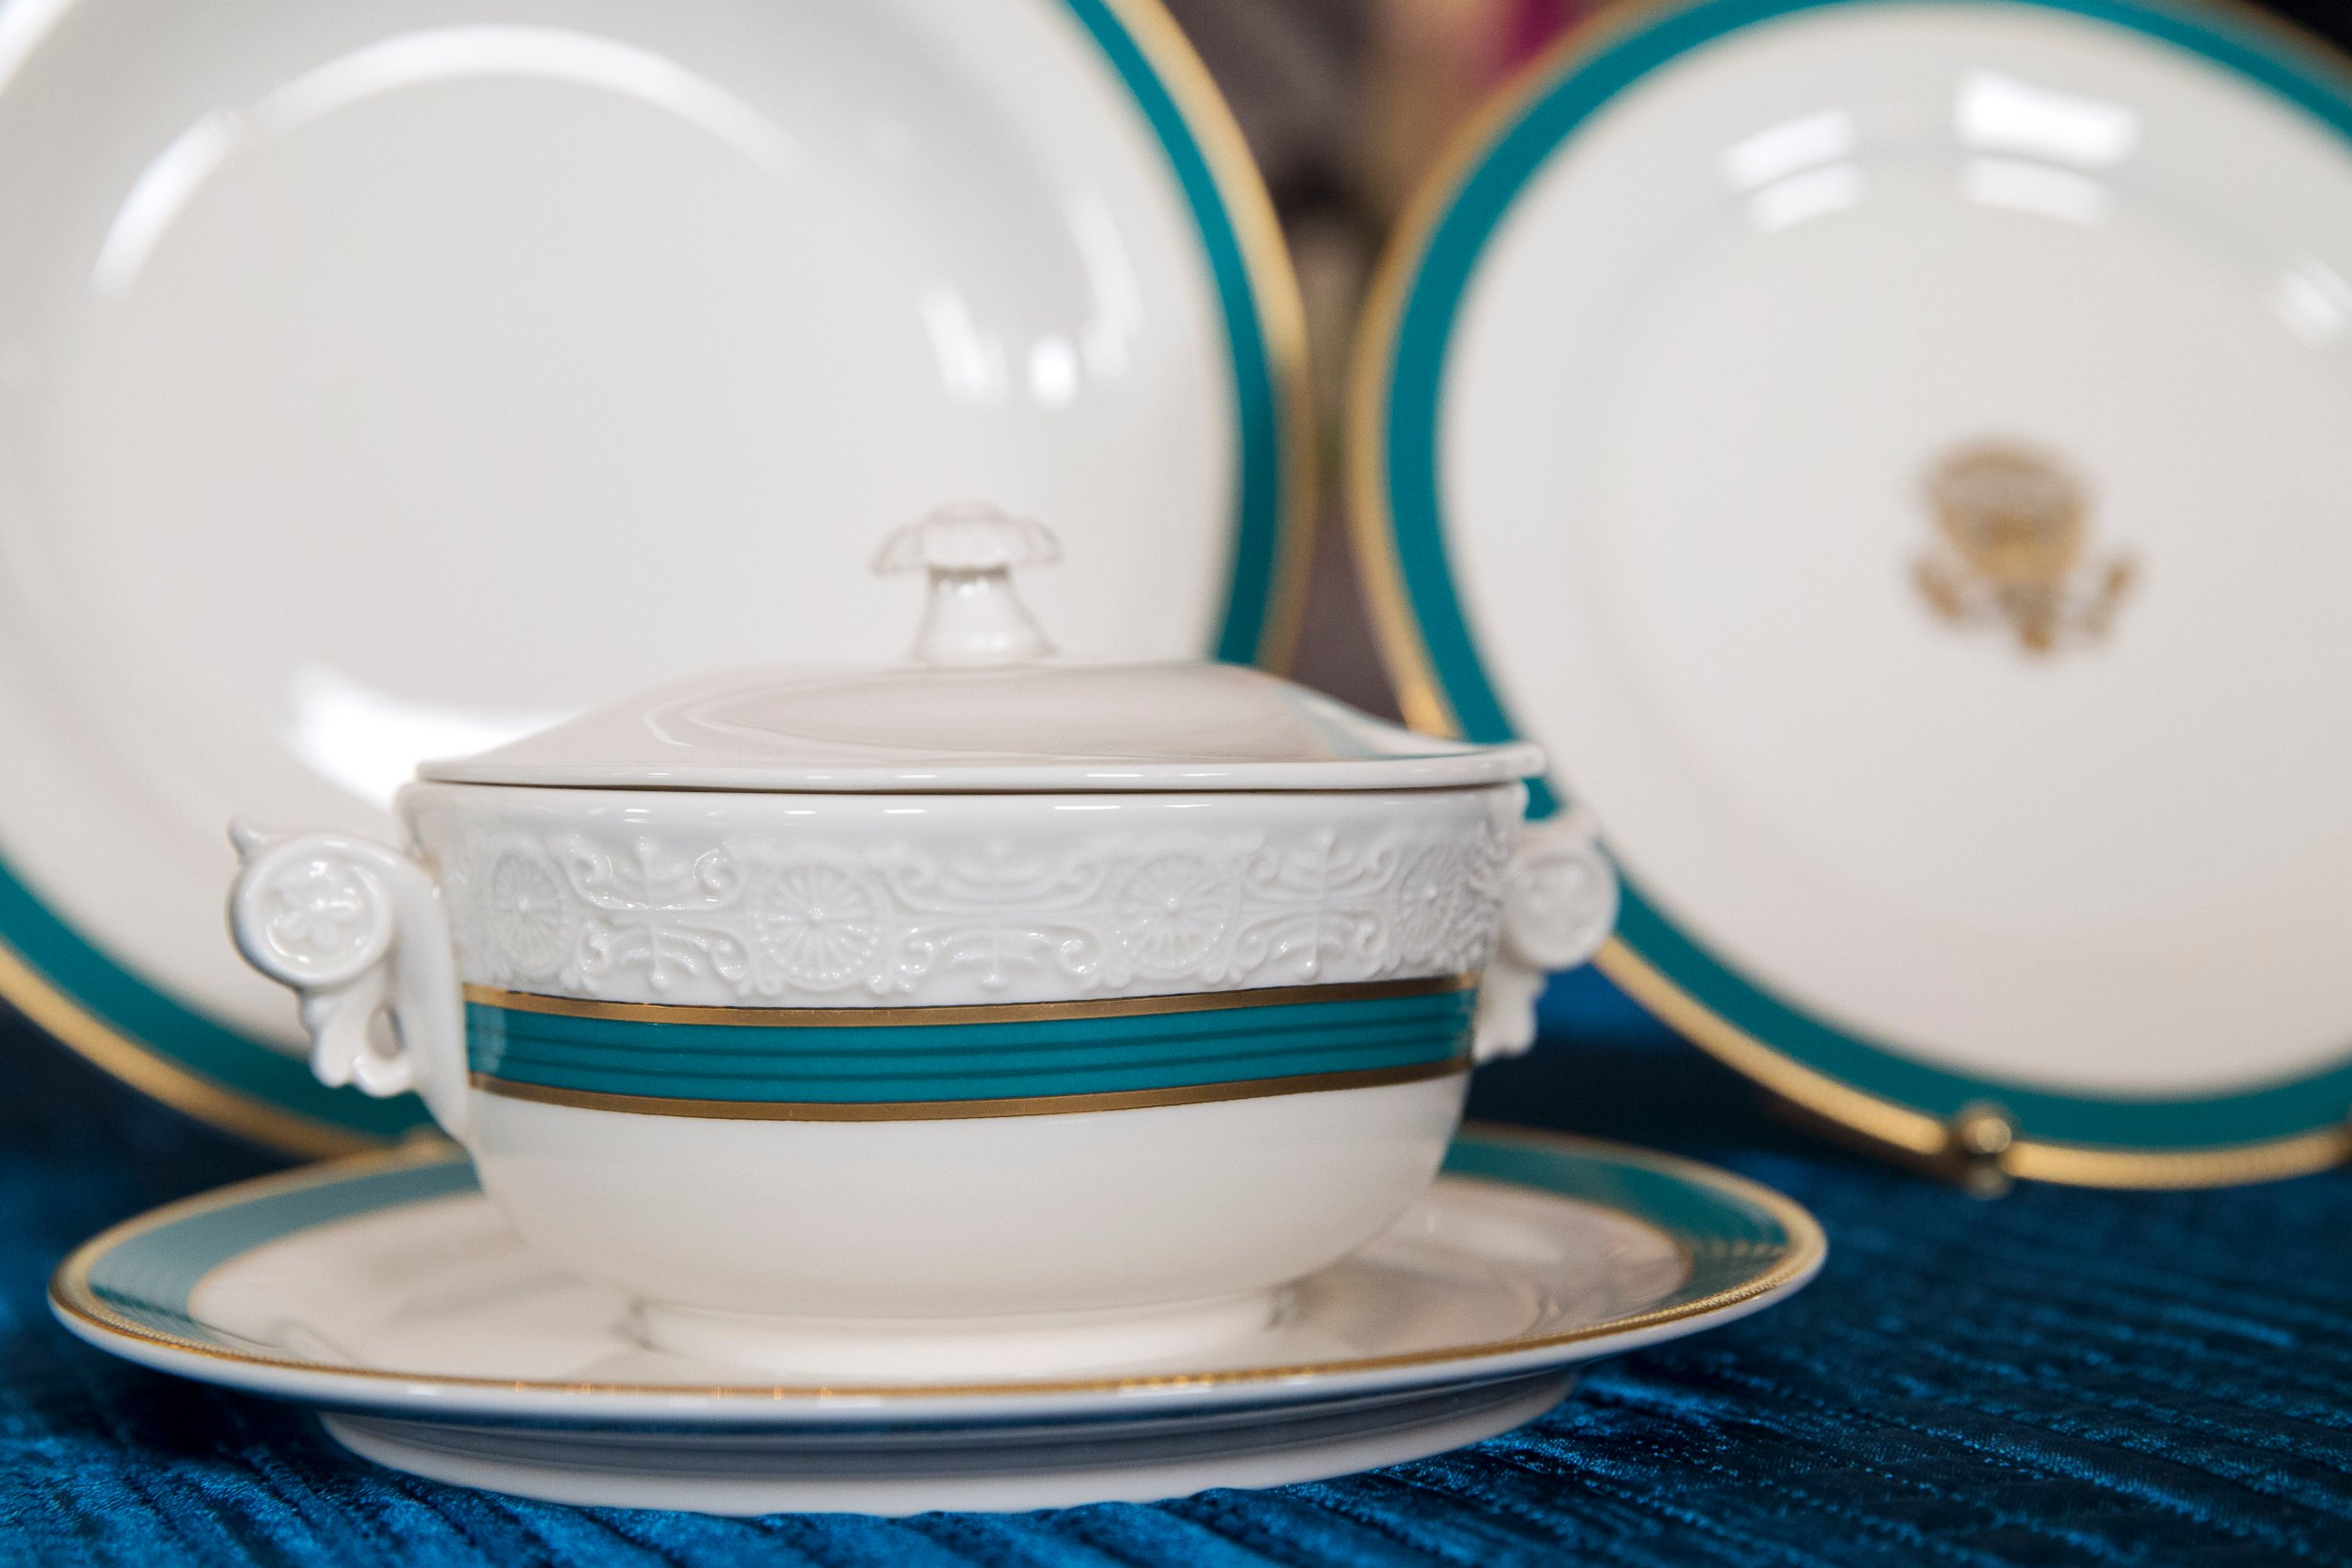 PHOTO: The White House previewed its new "Kailua Blue" china ahead of Tuesday's State Dinner with Japanese Prime Minister Shinzo Abe, April 27, 2015, in the State Dining Room of the White House in Washington.